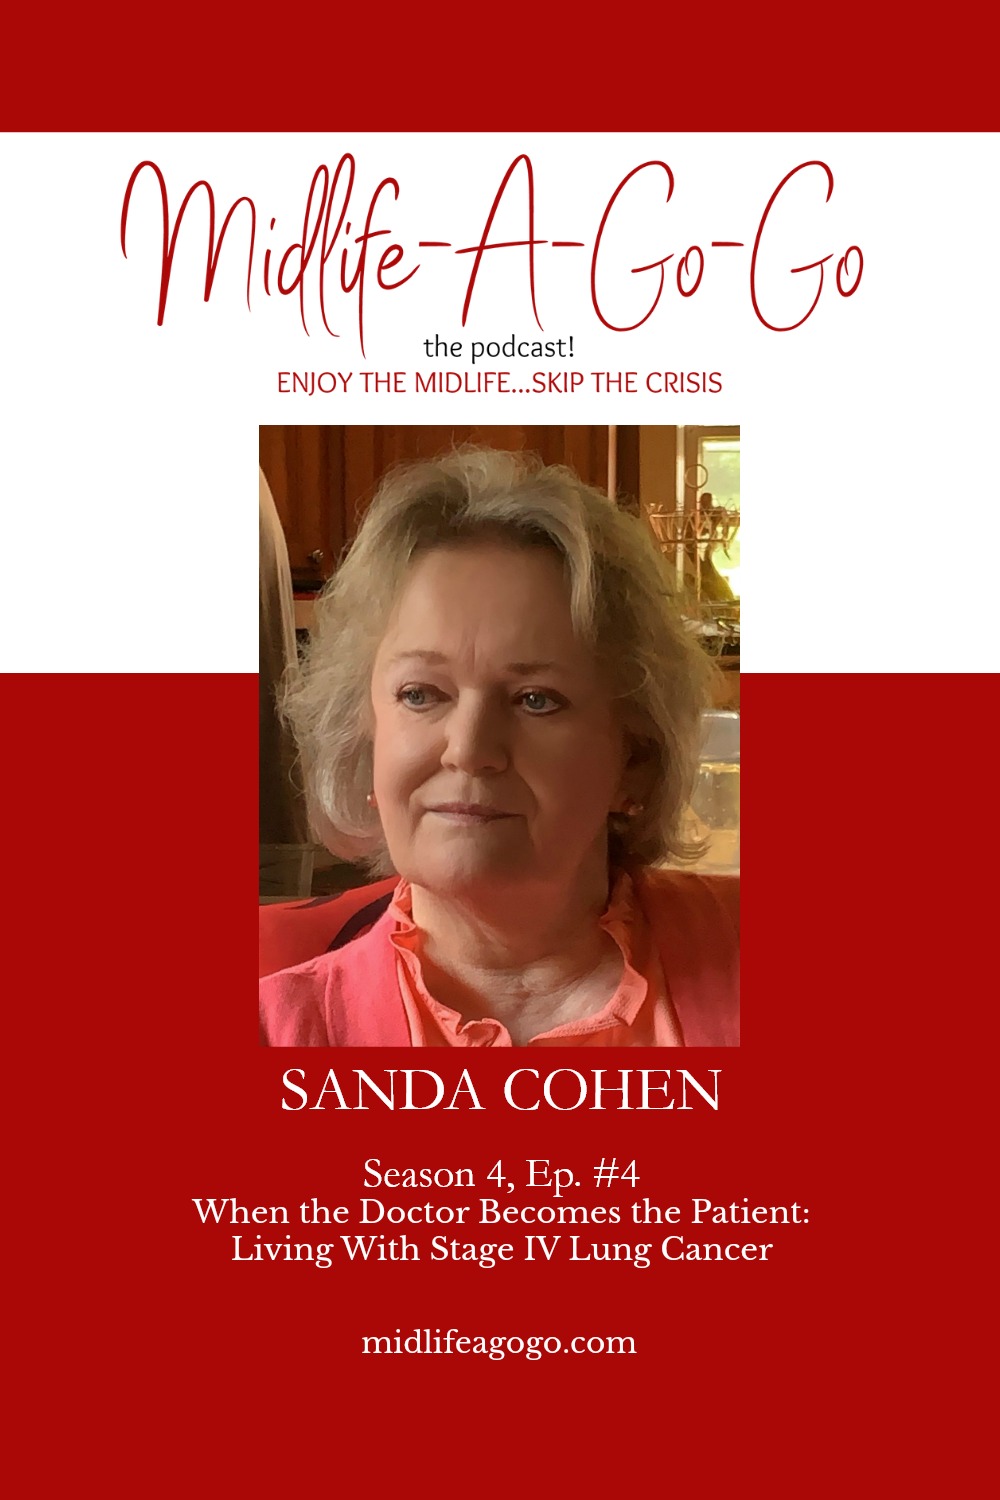 When the Doctor Becomes the Patient: Living With Stage IV Lung Cancer with Sanda Cohen